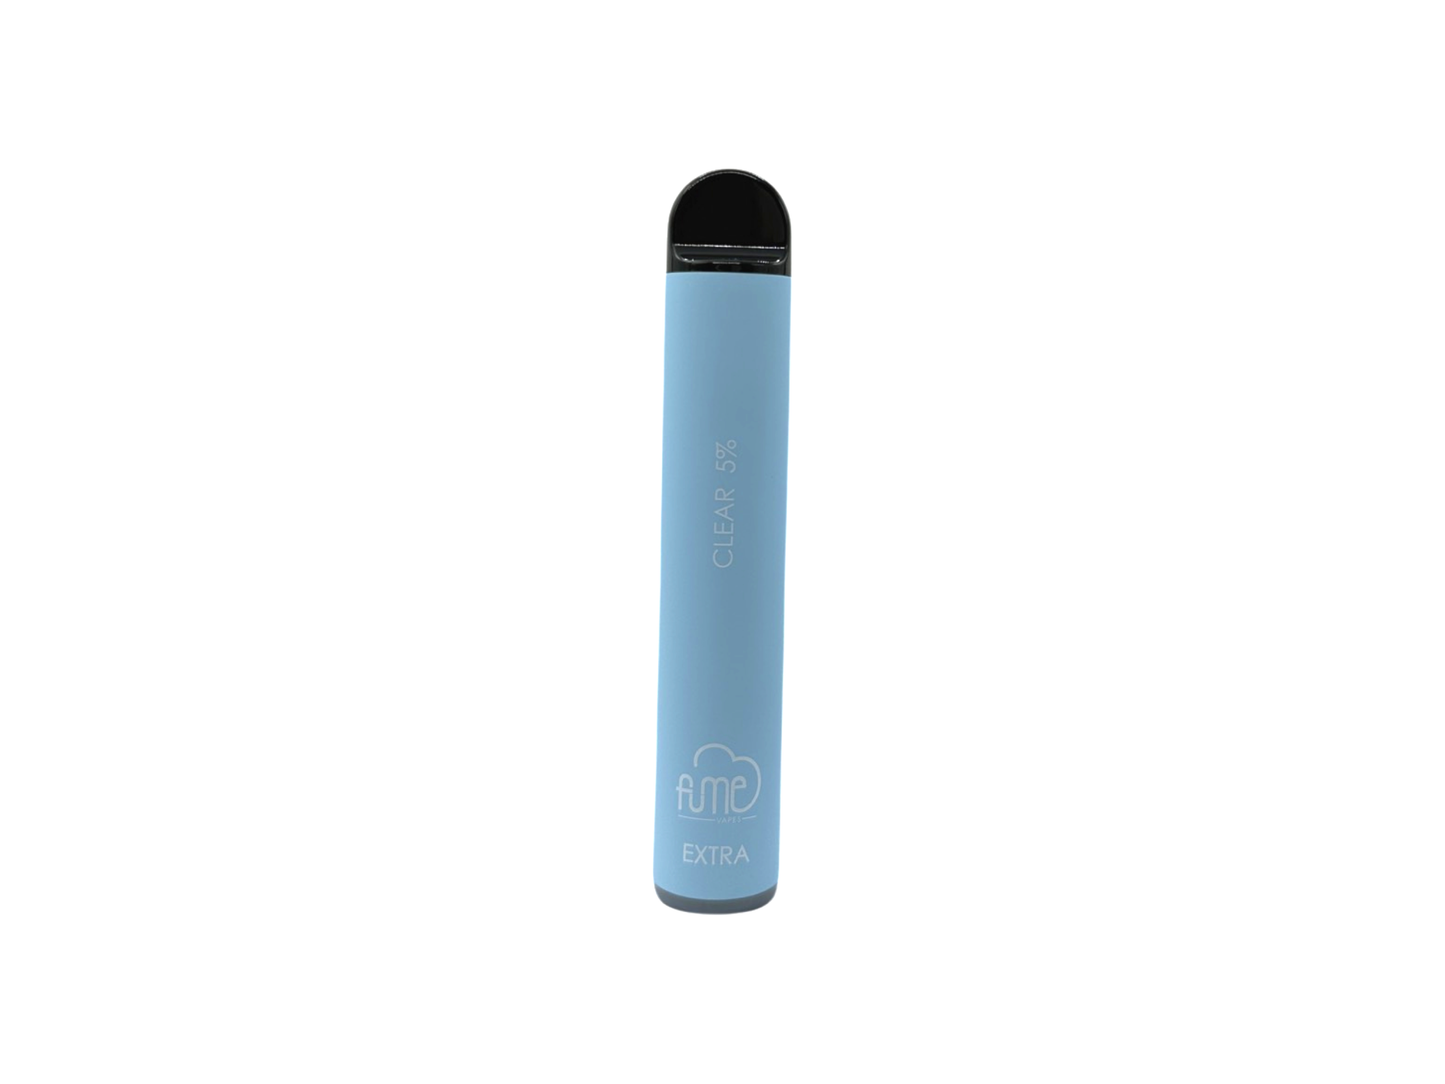 Fume Extra Clear flavored disposable vape device.